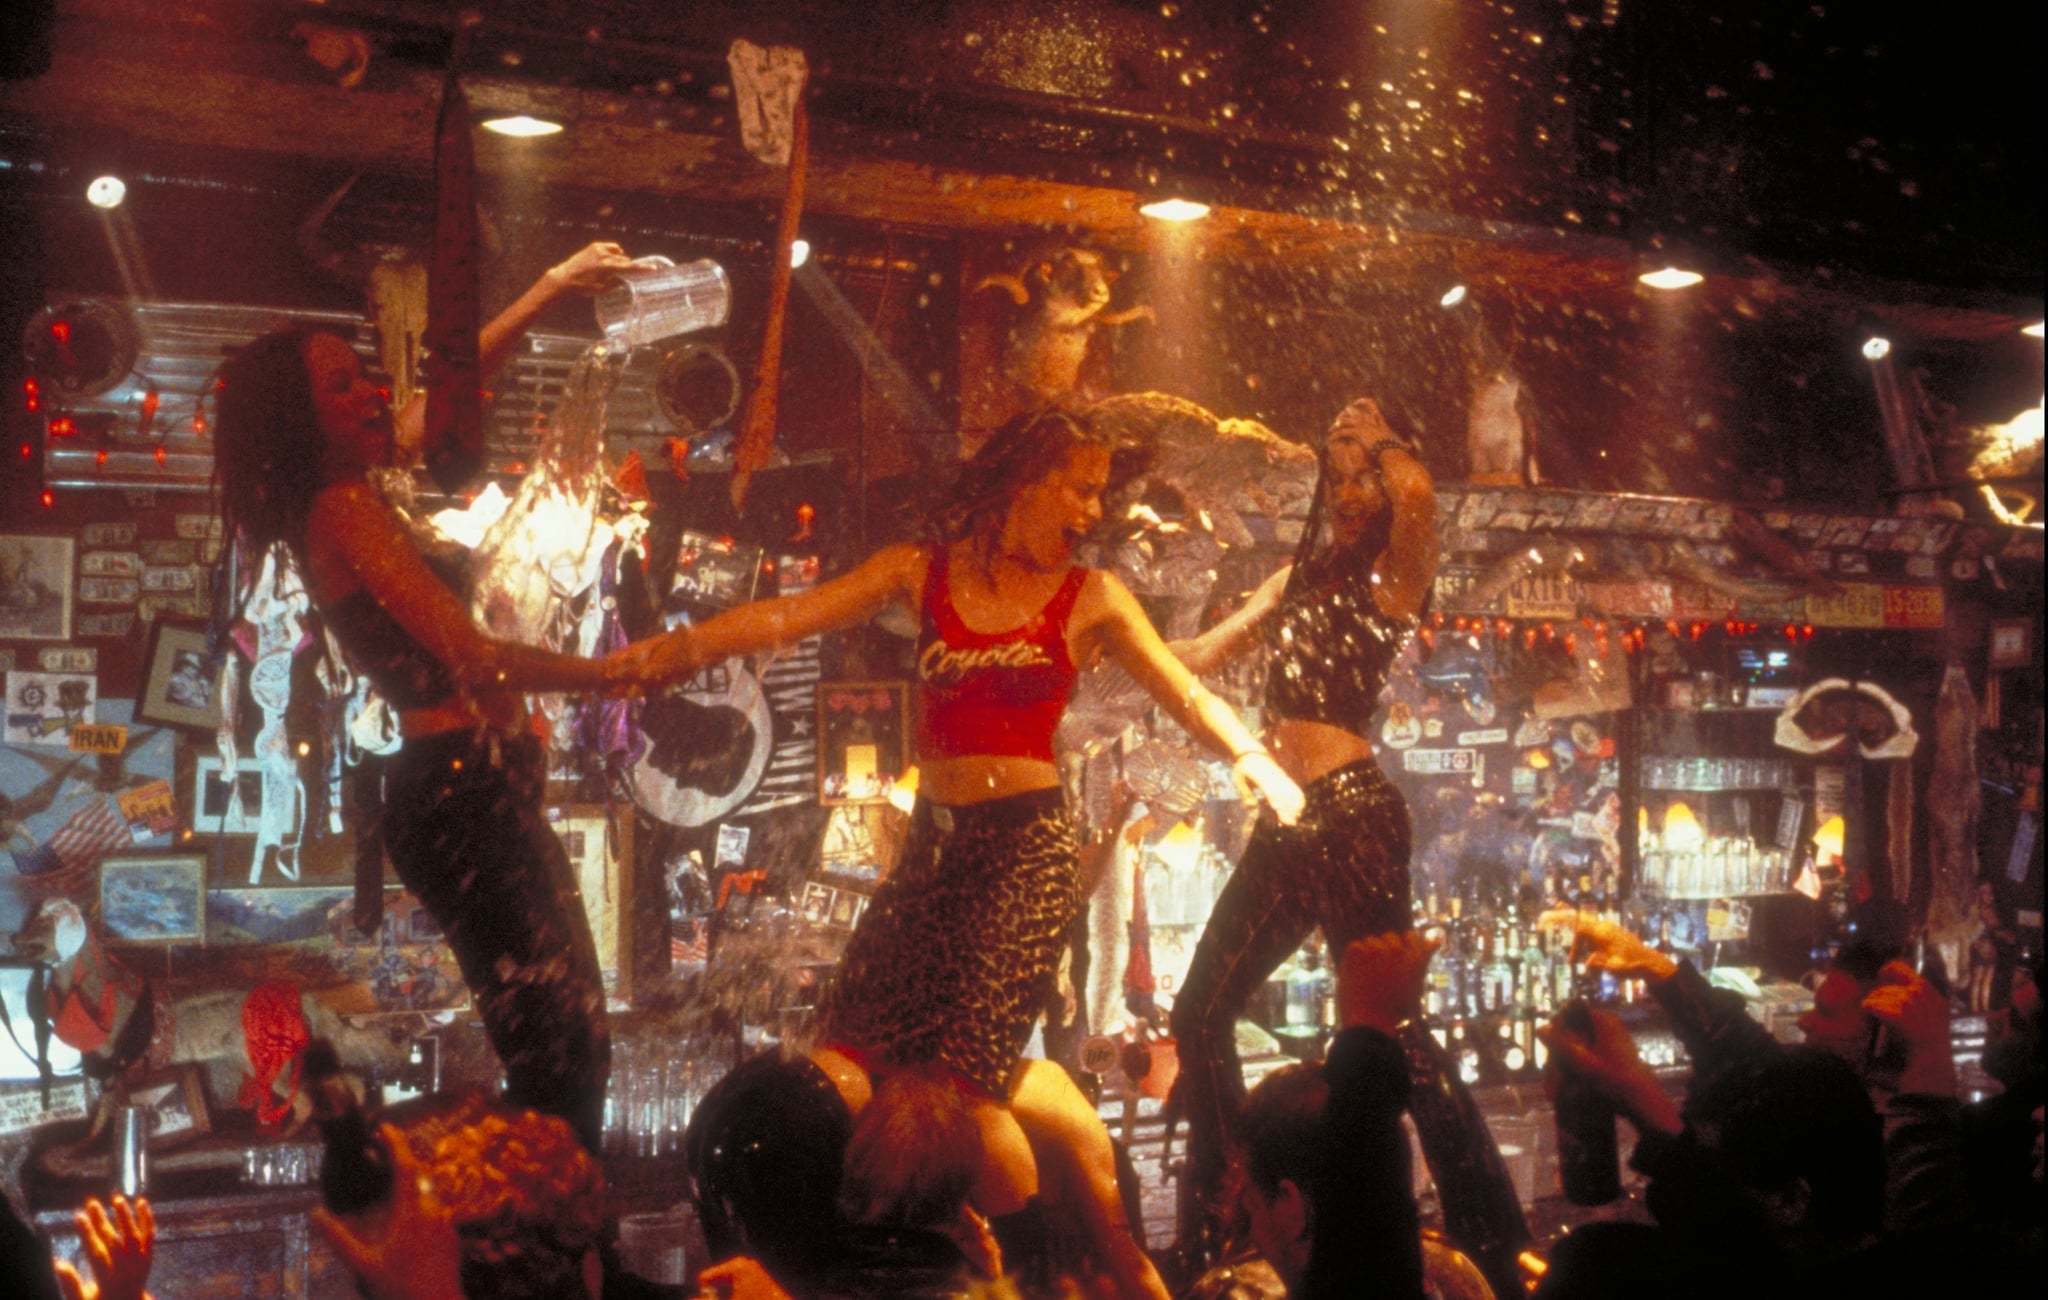 Coyote Ugly: The Inspiration